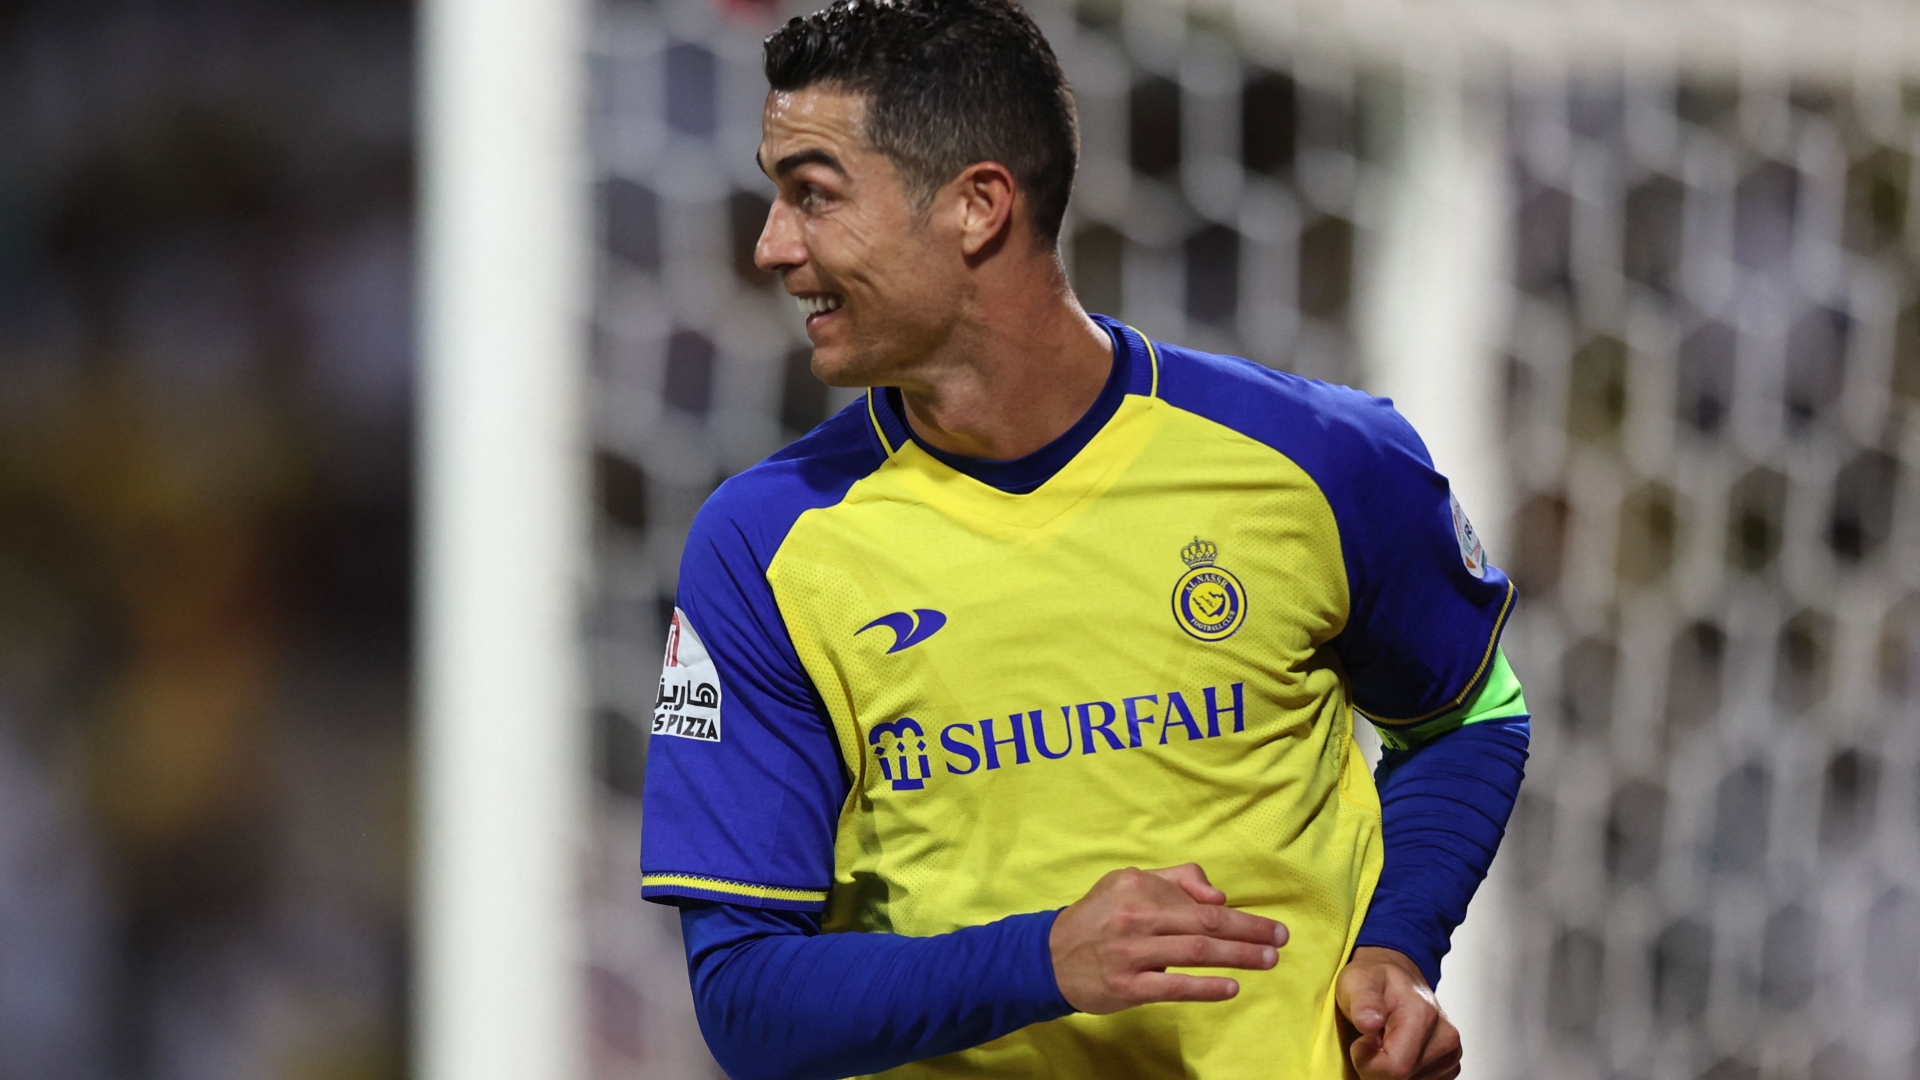 Cristiano Ronaldo ‘unbalances the scale’ as he sticks to promise of scoring 30 hat-tricks after 30th birthday in Al Nassr victory which saw him achieve multiple milestones